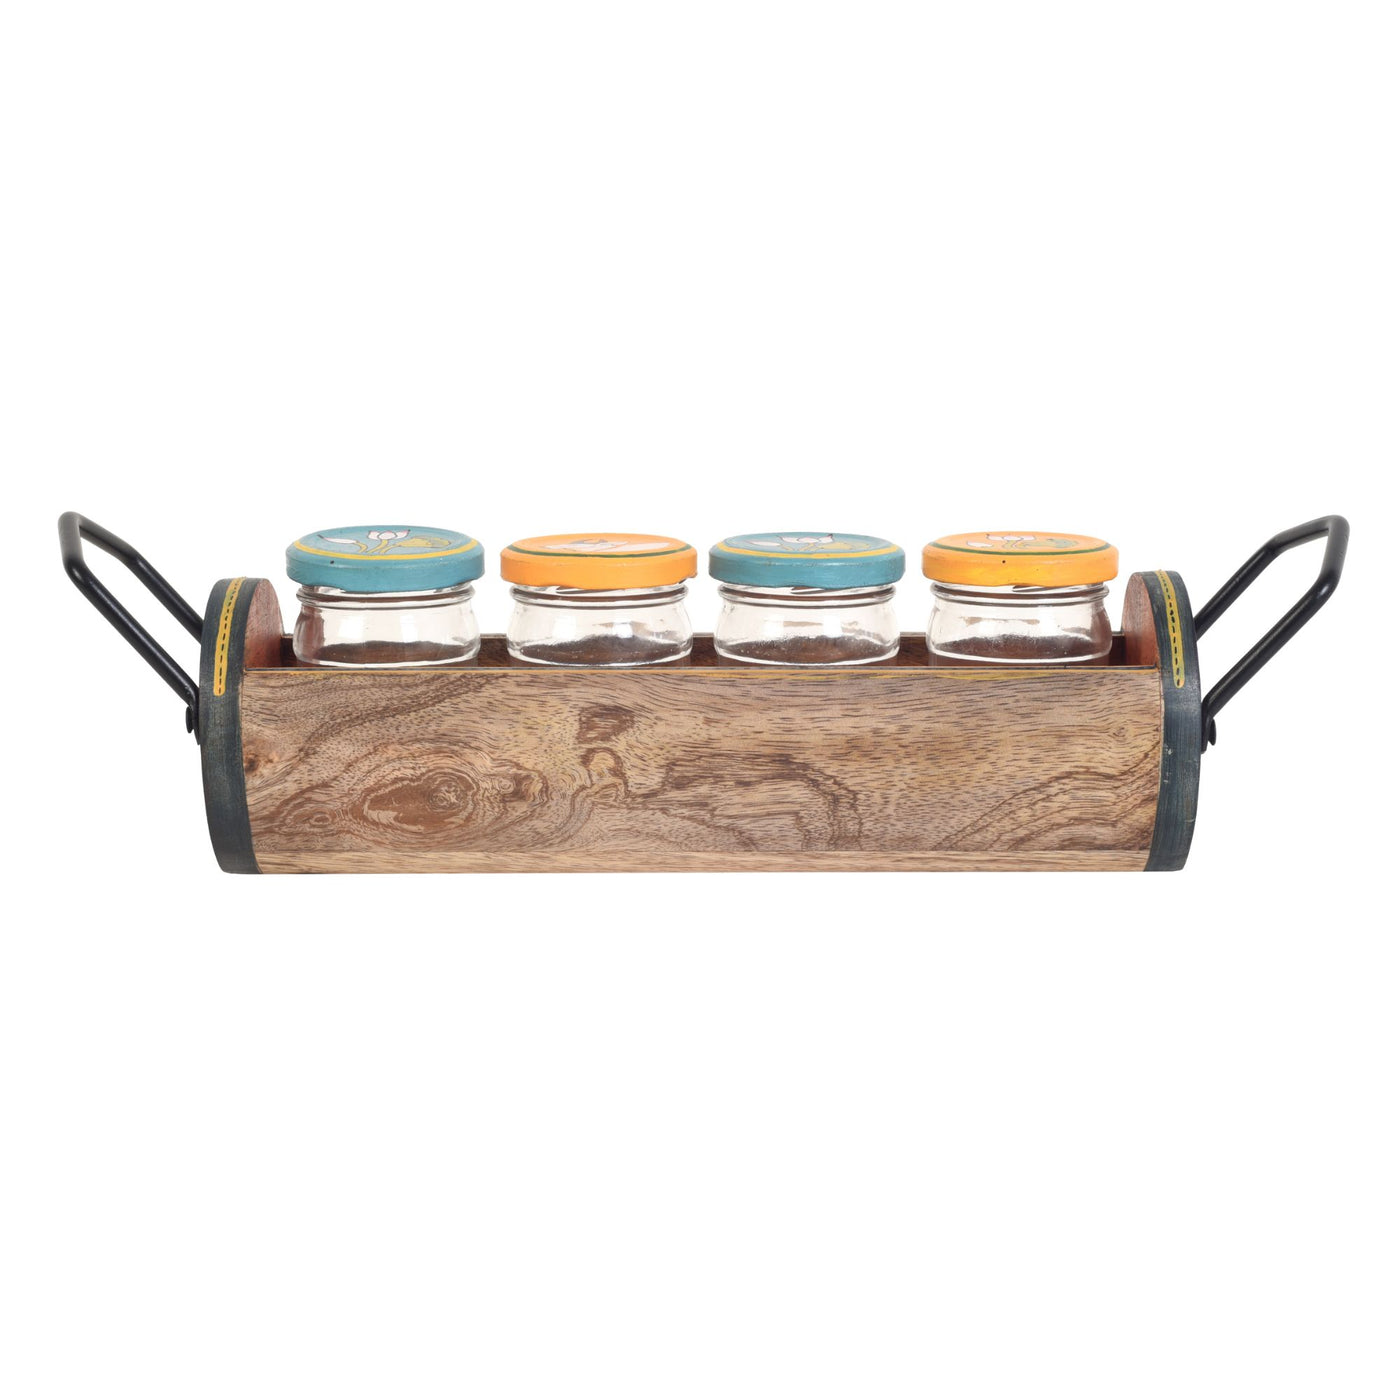 Pichhwai Art Pickle Serving Jars and Tray - Dining & Kitchen - 5